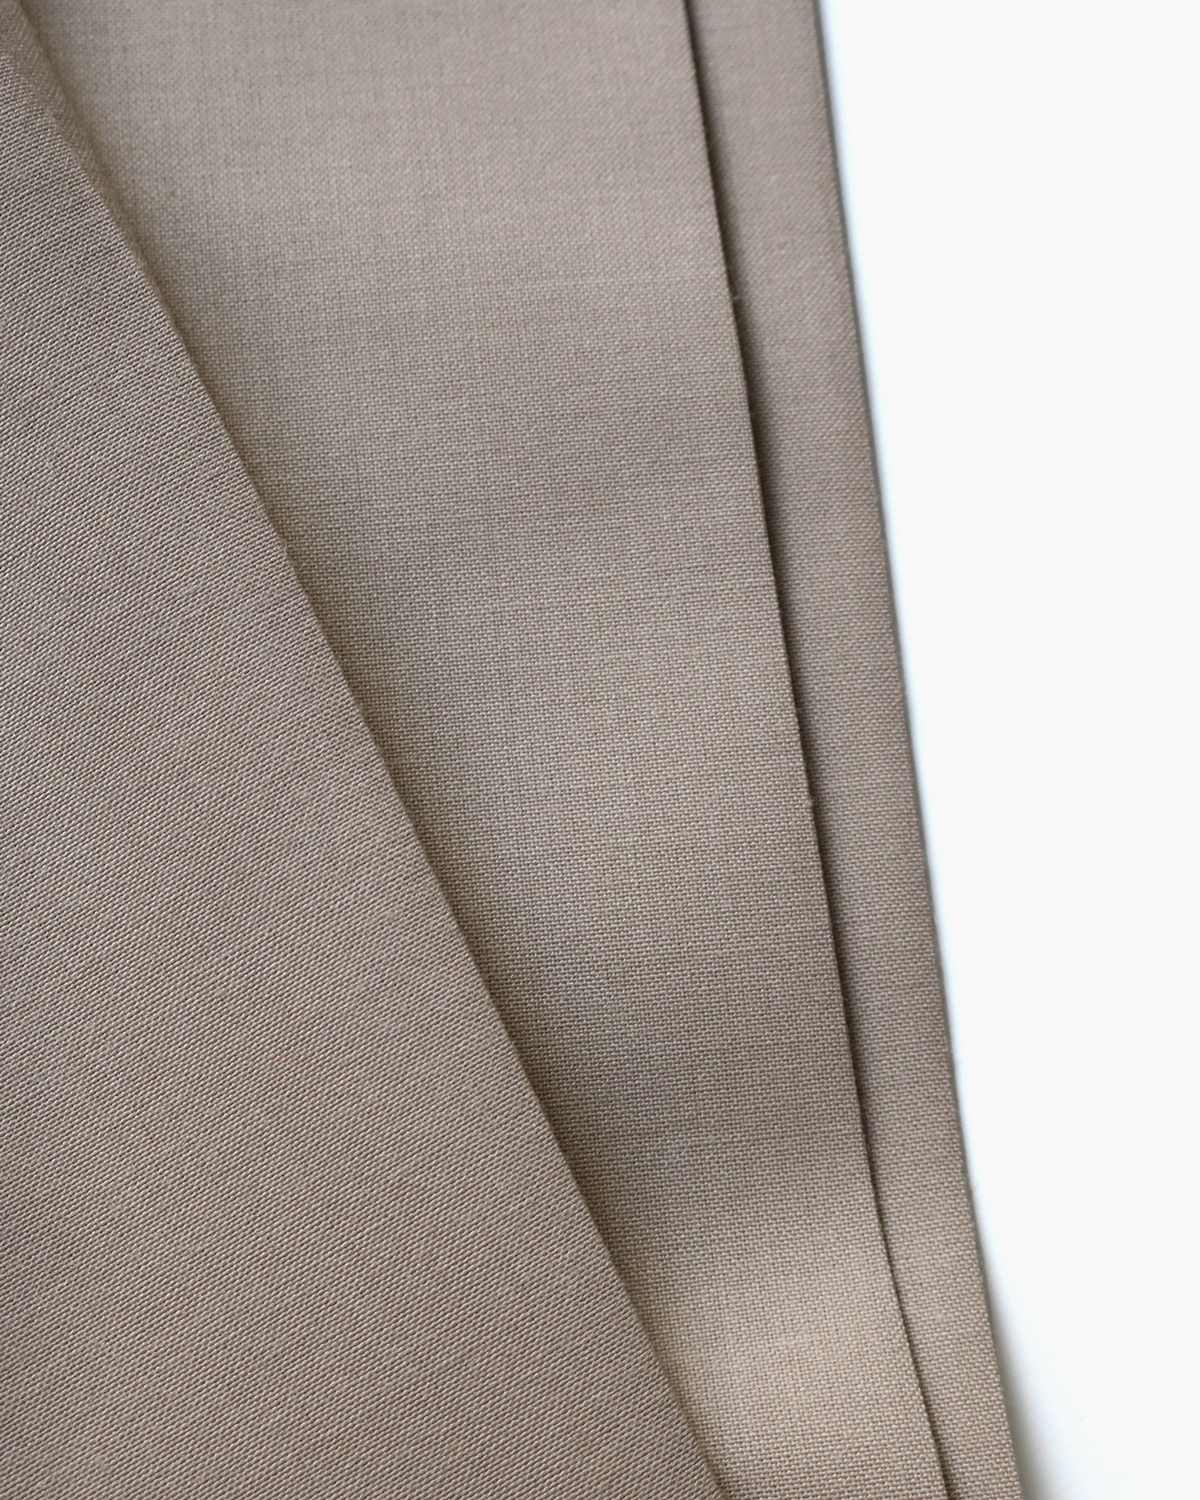 NEAT｜AWC TROPICAL｜WIDE - Beige｜PRODUCT｜Continuer Inc.｜メガネ ...